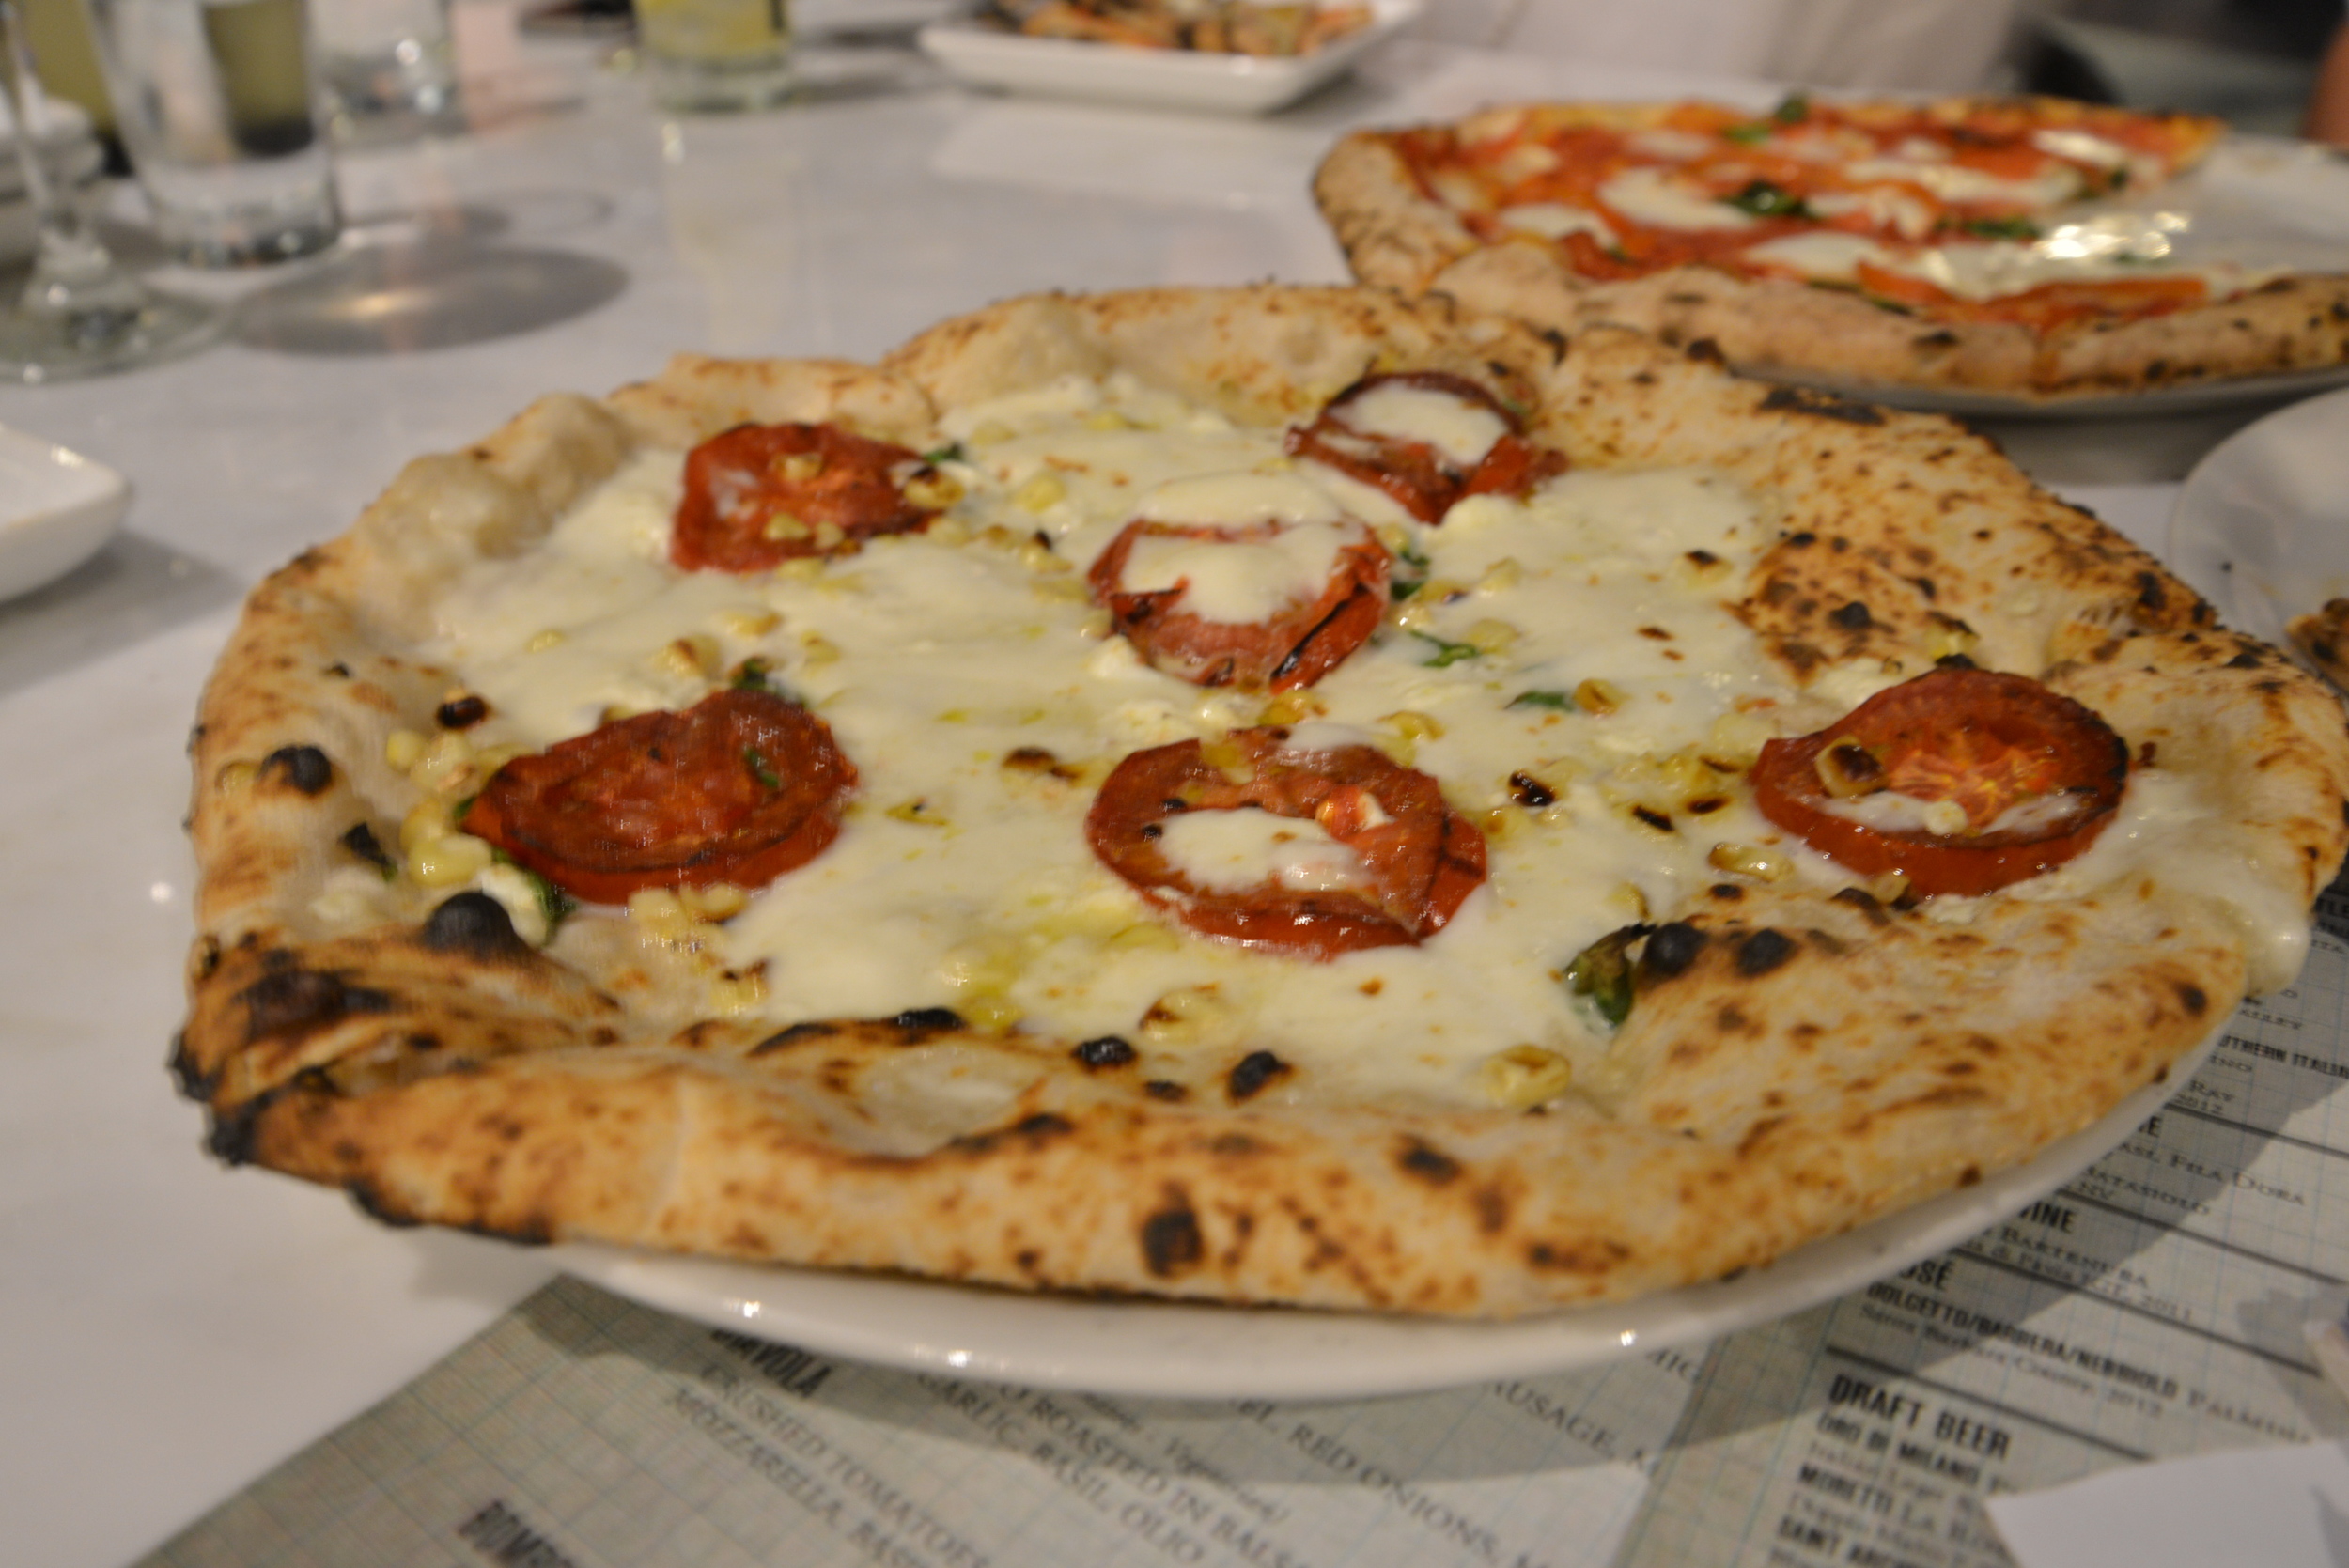   Corn and goat cheese give Settebello's Umbria pizza ($14) a nontraditional twist./ HEATHER GOLDIN, STAFF&nbsp;  